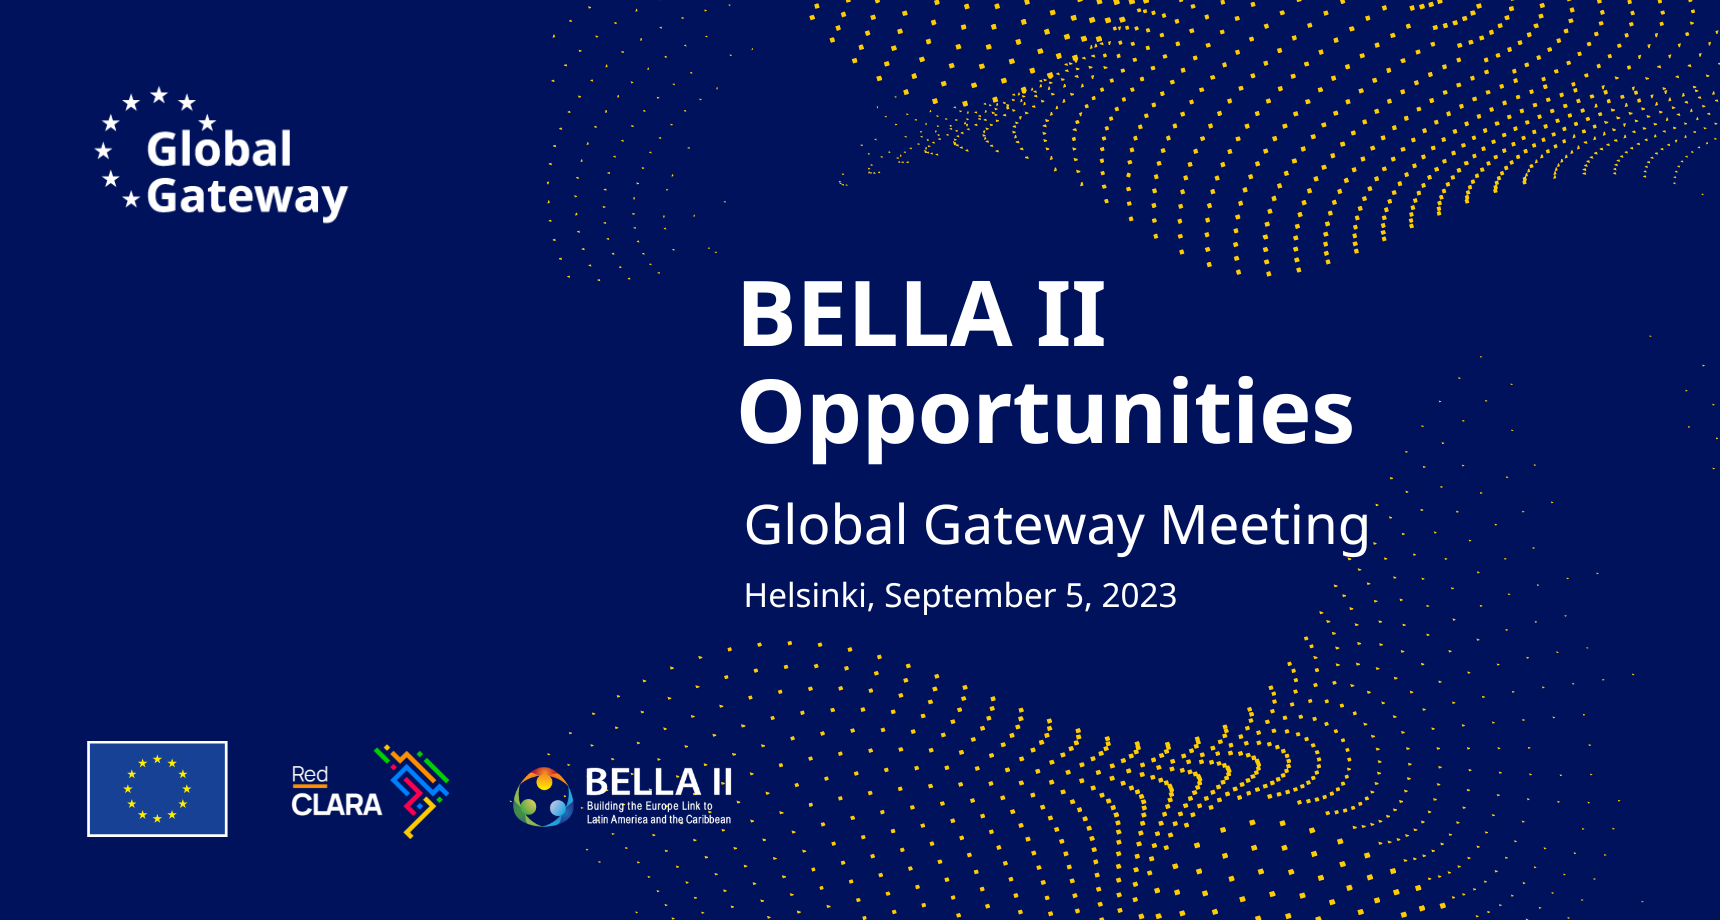  RedCLARA and BELLA II will present a portfolio of connectivity projects in Global Gateway meeting in Finland.